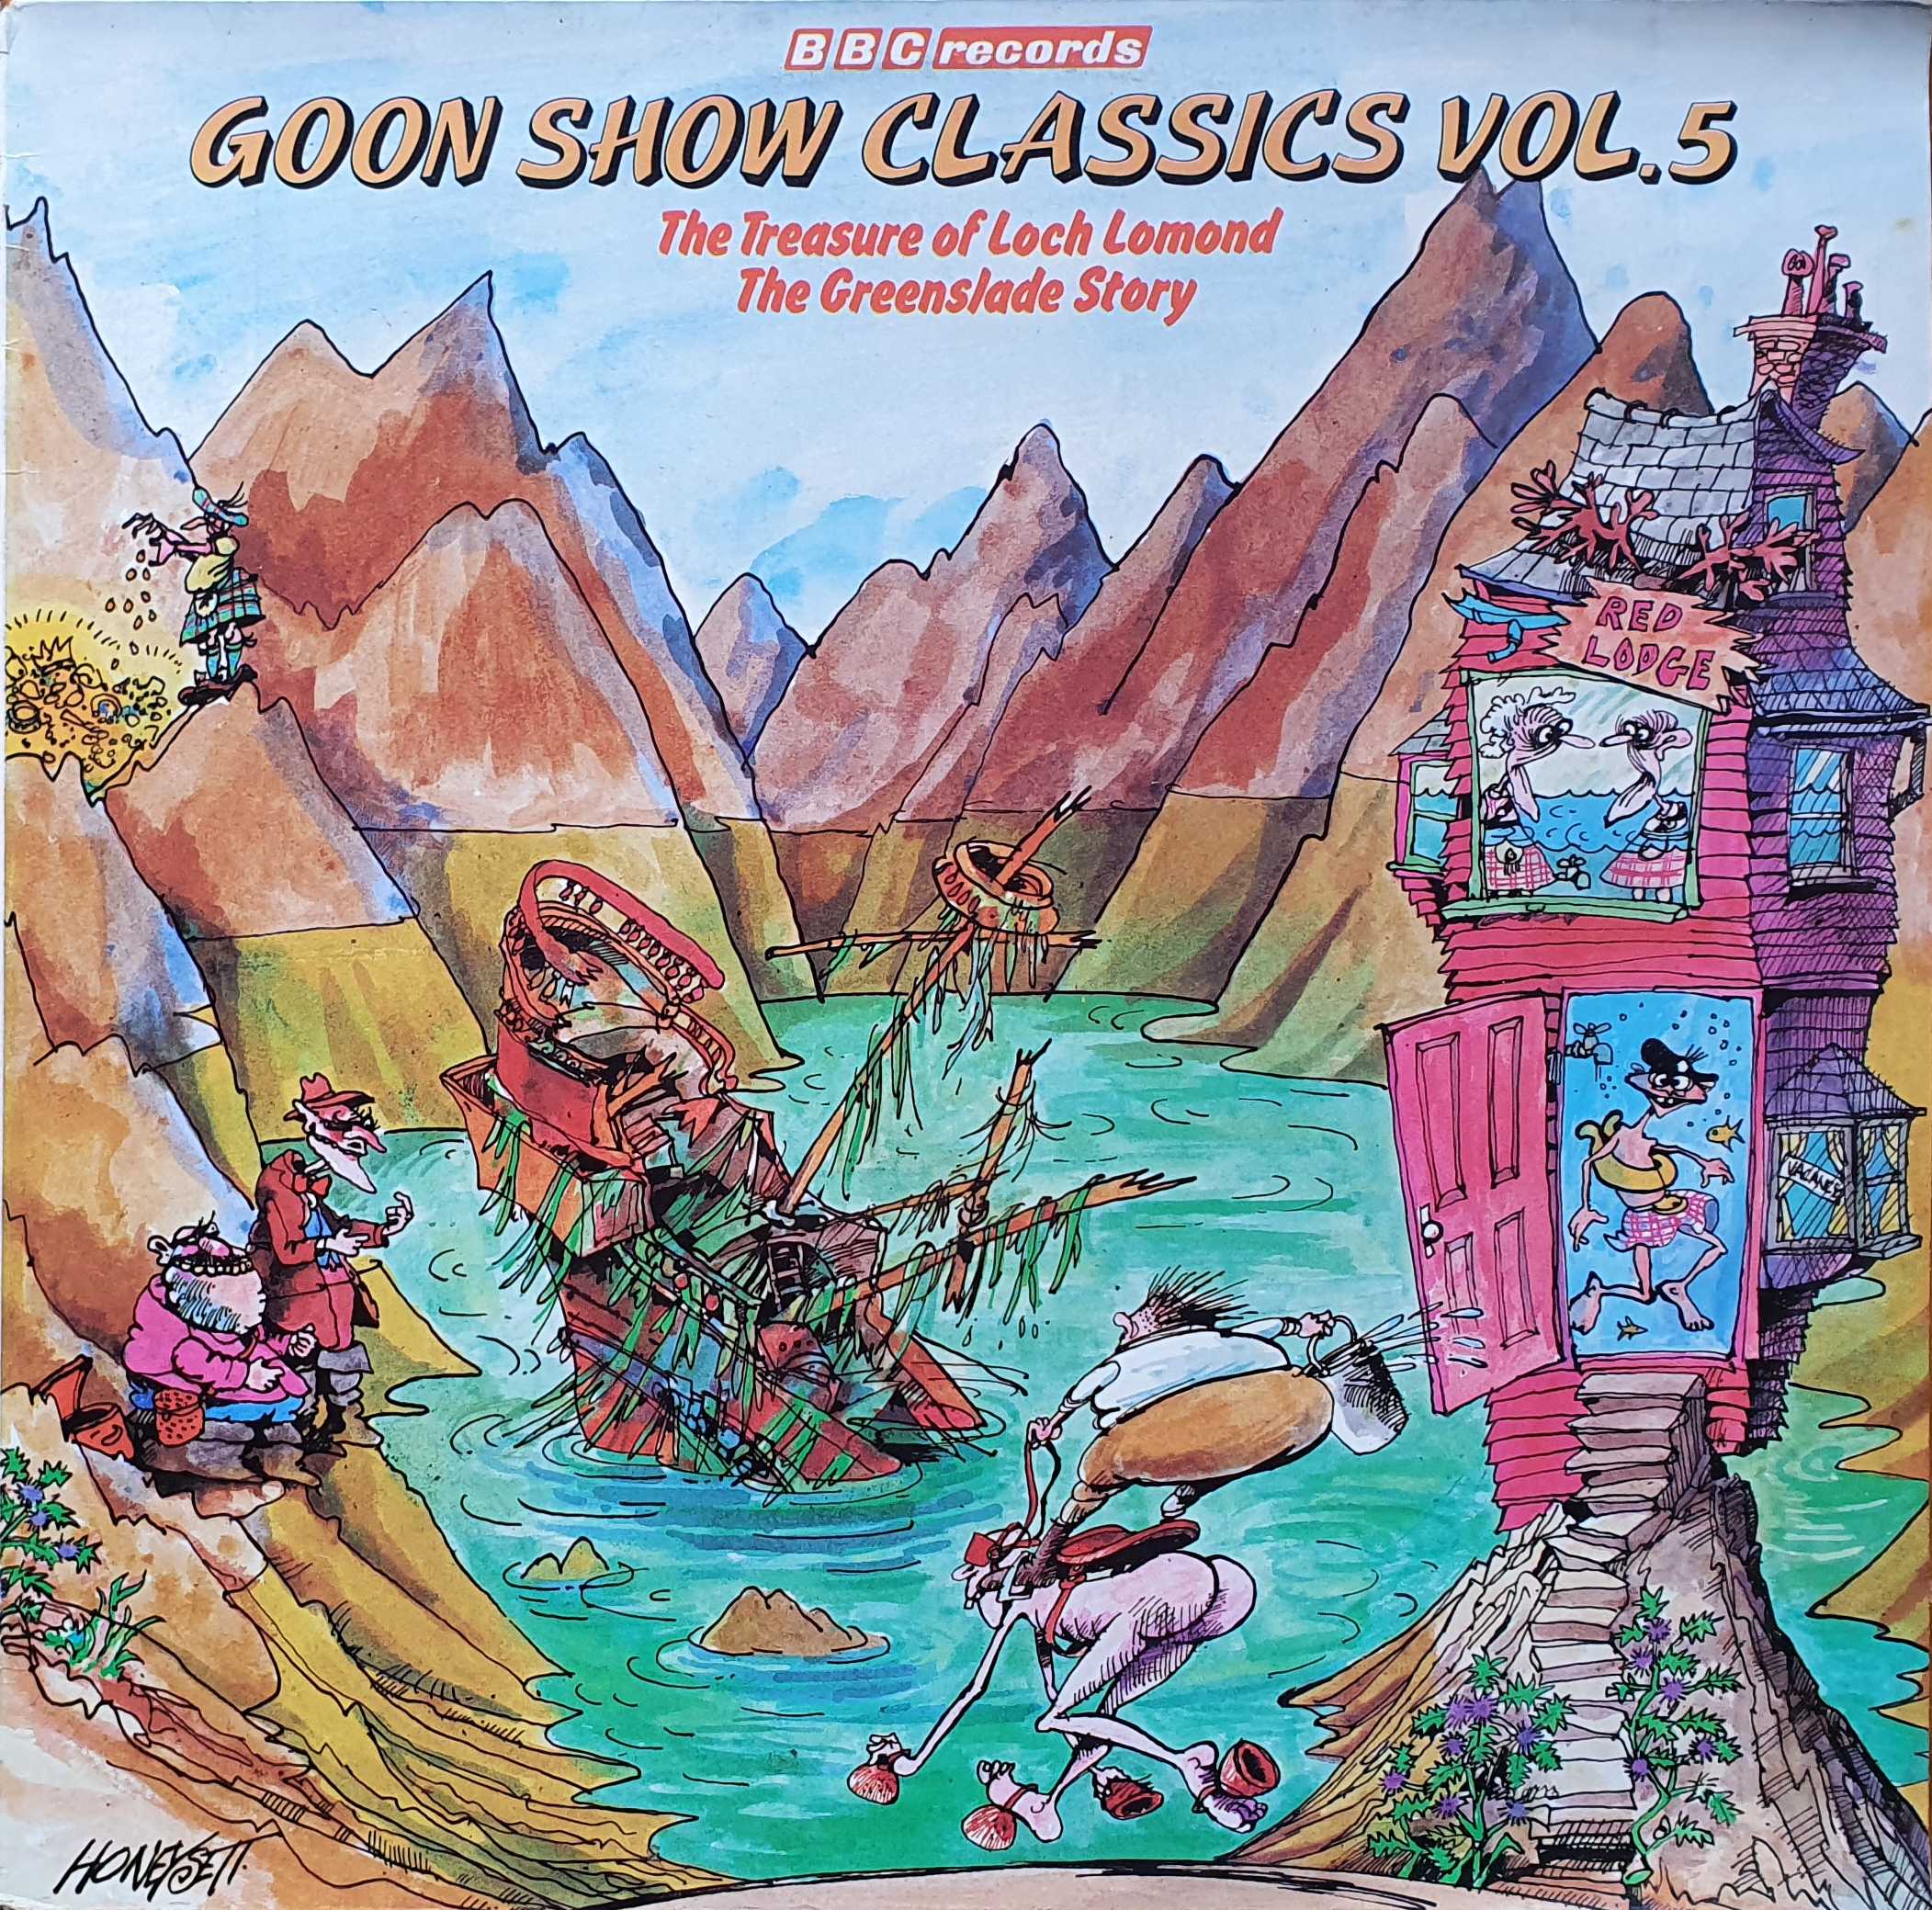 Picture of Goon show classics - Volume 5 by artist Spike Milligan from the BBC albums - Records and Tapes library